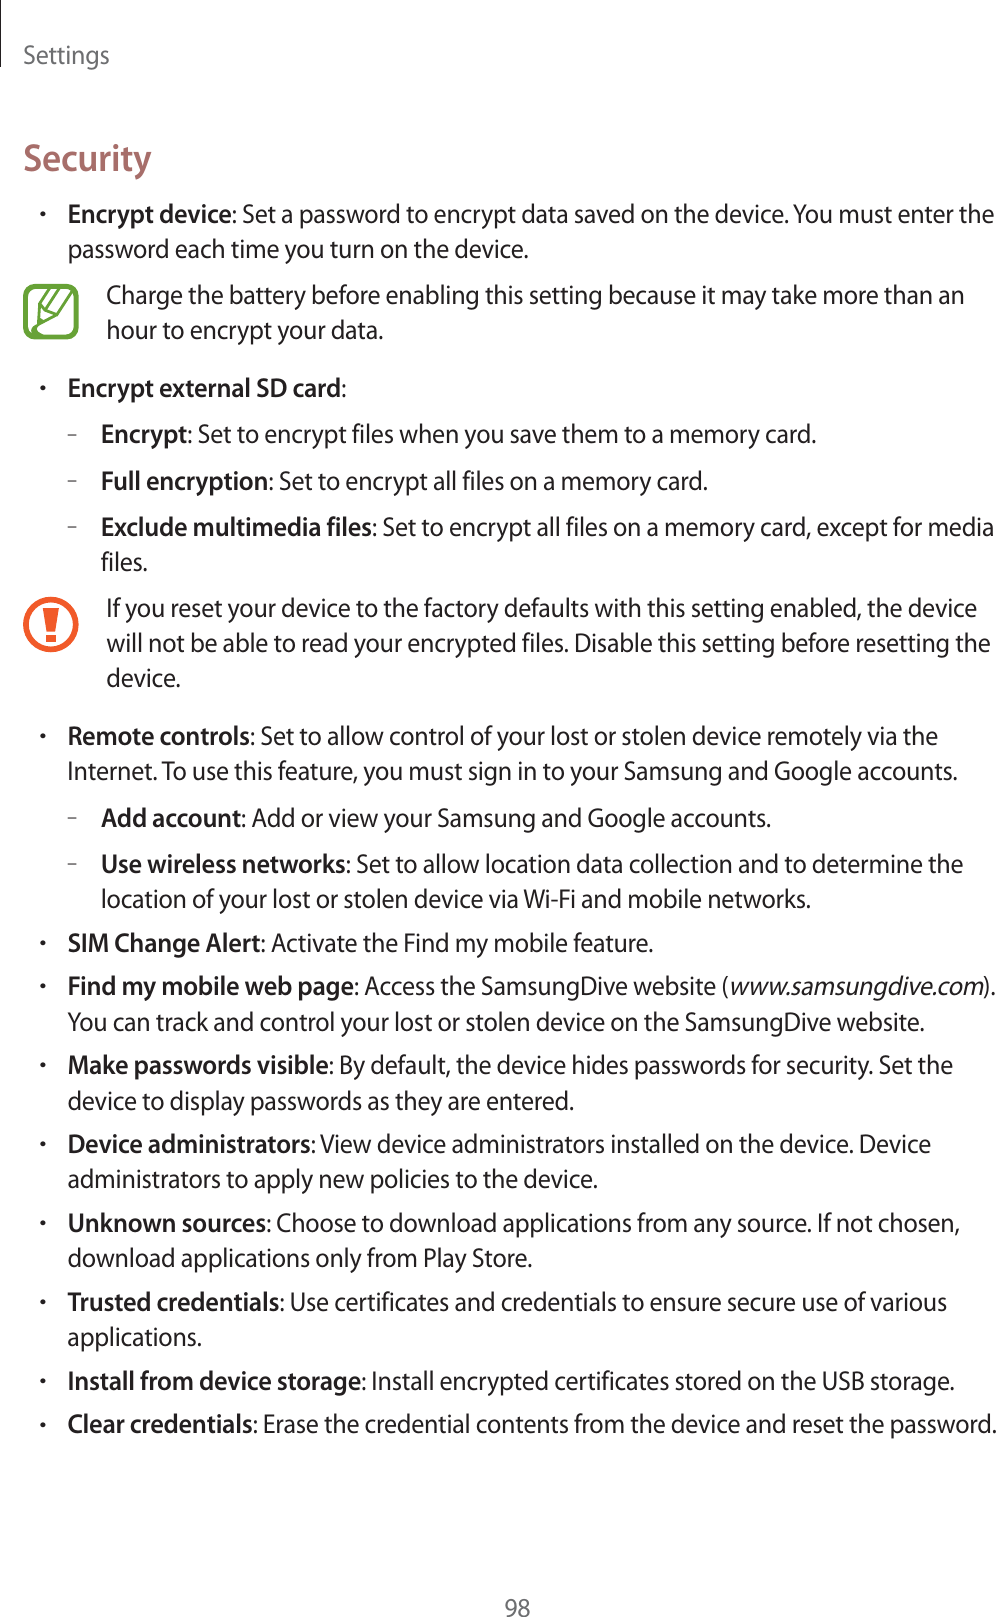 Settings98SecurityrEncrypt device: Set a password to encrypt data saved on the device. You must enter the password each time you turn on the device.Charge the battery before enabling this setting because it may take more than an hour to encrypt your data.rEncrypt external SD card:–Encrypt: Set to encrypt files when you save them to a memory card.–Full encryption: Set to encrypt all files on a memory card.–Exclude multimedia files: Set to encrypt all files on a memory card, except for media files.If you reset your device to the factory defaults with this setting enabled, the device will not be able to read your encrypted files. Disable this setting before resetting the device.rRemote controls: Set to allow control of your lost or stolen device remotely via the Internet. To use this feature, you must sign in to your Samsung and Google accounts.–Add account: Add or view your Samsung and Google accounts.–Use wireless networks: Set to allow location data collection and to determine the location of your lost or stolen device via Wi-Fi and mobile networks.rSIM Change Alert: Activate the Find my mobile feature.rFind my mobile web page: Access the SamsungDive website (www.samsungdive.com). You can track and control your lost or stolen device on the SamsungDive website.rMake passwords visible: By default, the device hides passwords for security. Set the device to display passwords as they are entered.rDevice administrators: View device administrators installed on the device. Device administrators to apply new policies to the device.rUnknown sources: Choose to download applications from any source. If not chosen, download applications only from Play Store.rTrusted credentials: Use certificates and credentials to ensure secure use of various applications.rInstall from device storage: Install encrypted certificates stored on the USB storage.rClear credentials: Erase the credential contents from the device and reset the password.